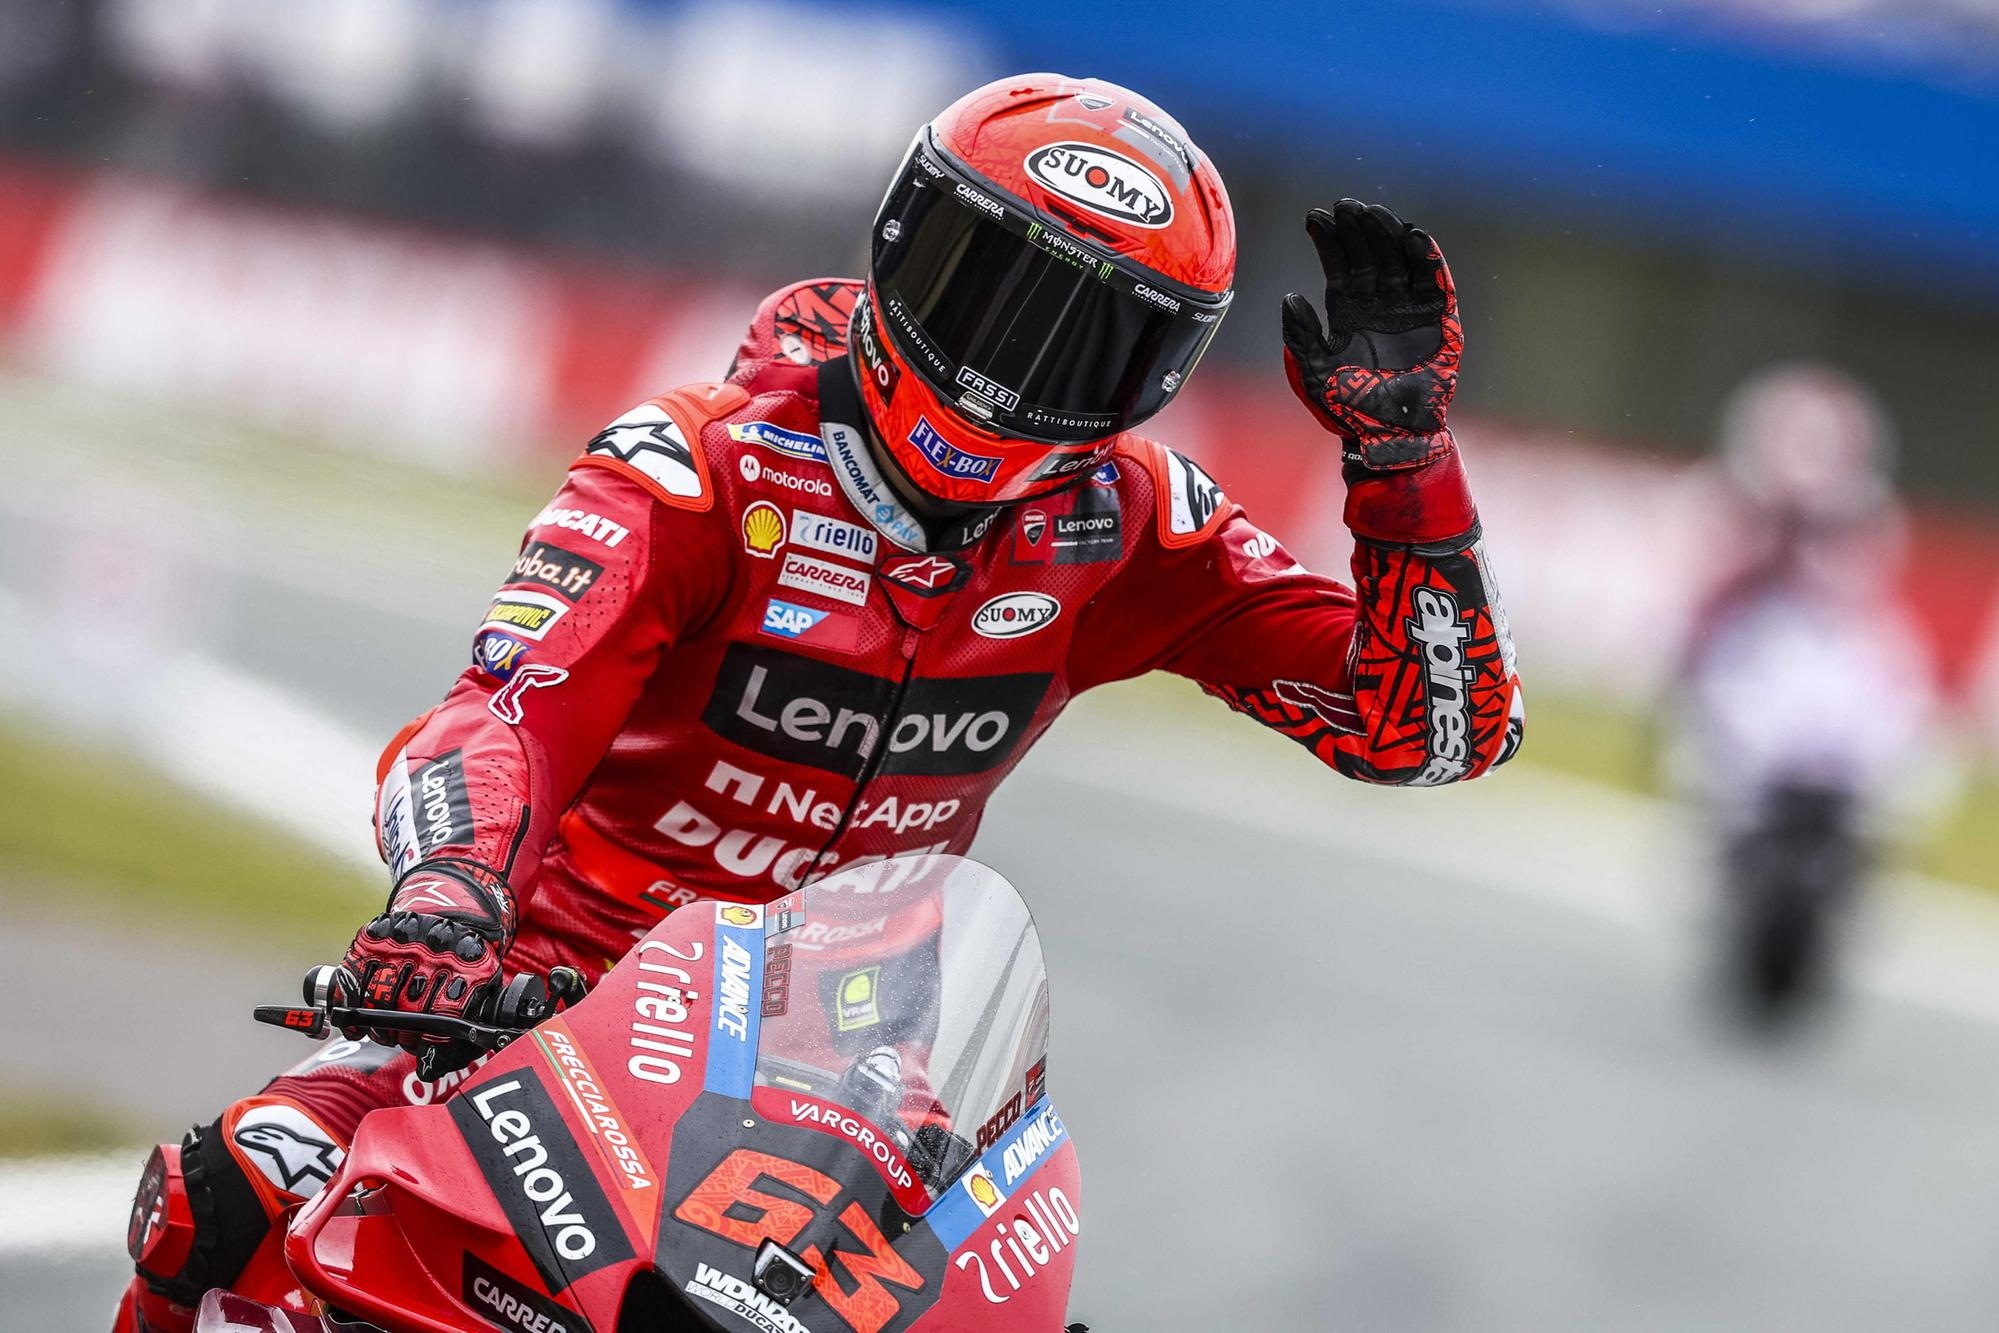 Francesco Bagnaia from Italy on his Ducati celebrates winning the MotoGP qualifying session for the Motorcycling Grand Prix of the Netherlands at the TT circuit of Assen, Netherlands, 25 June 2022. ANSA/Vincent Jannink